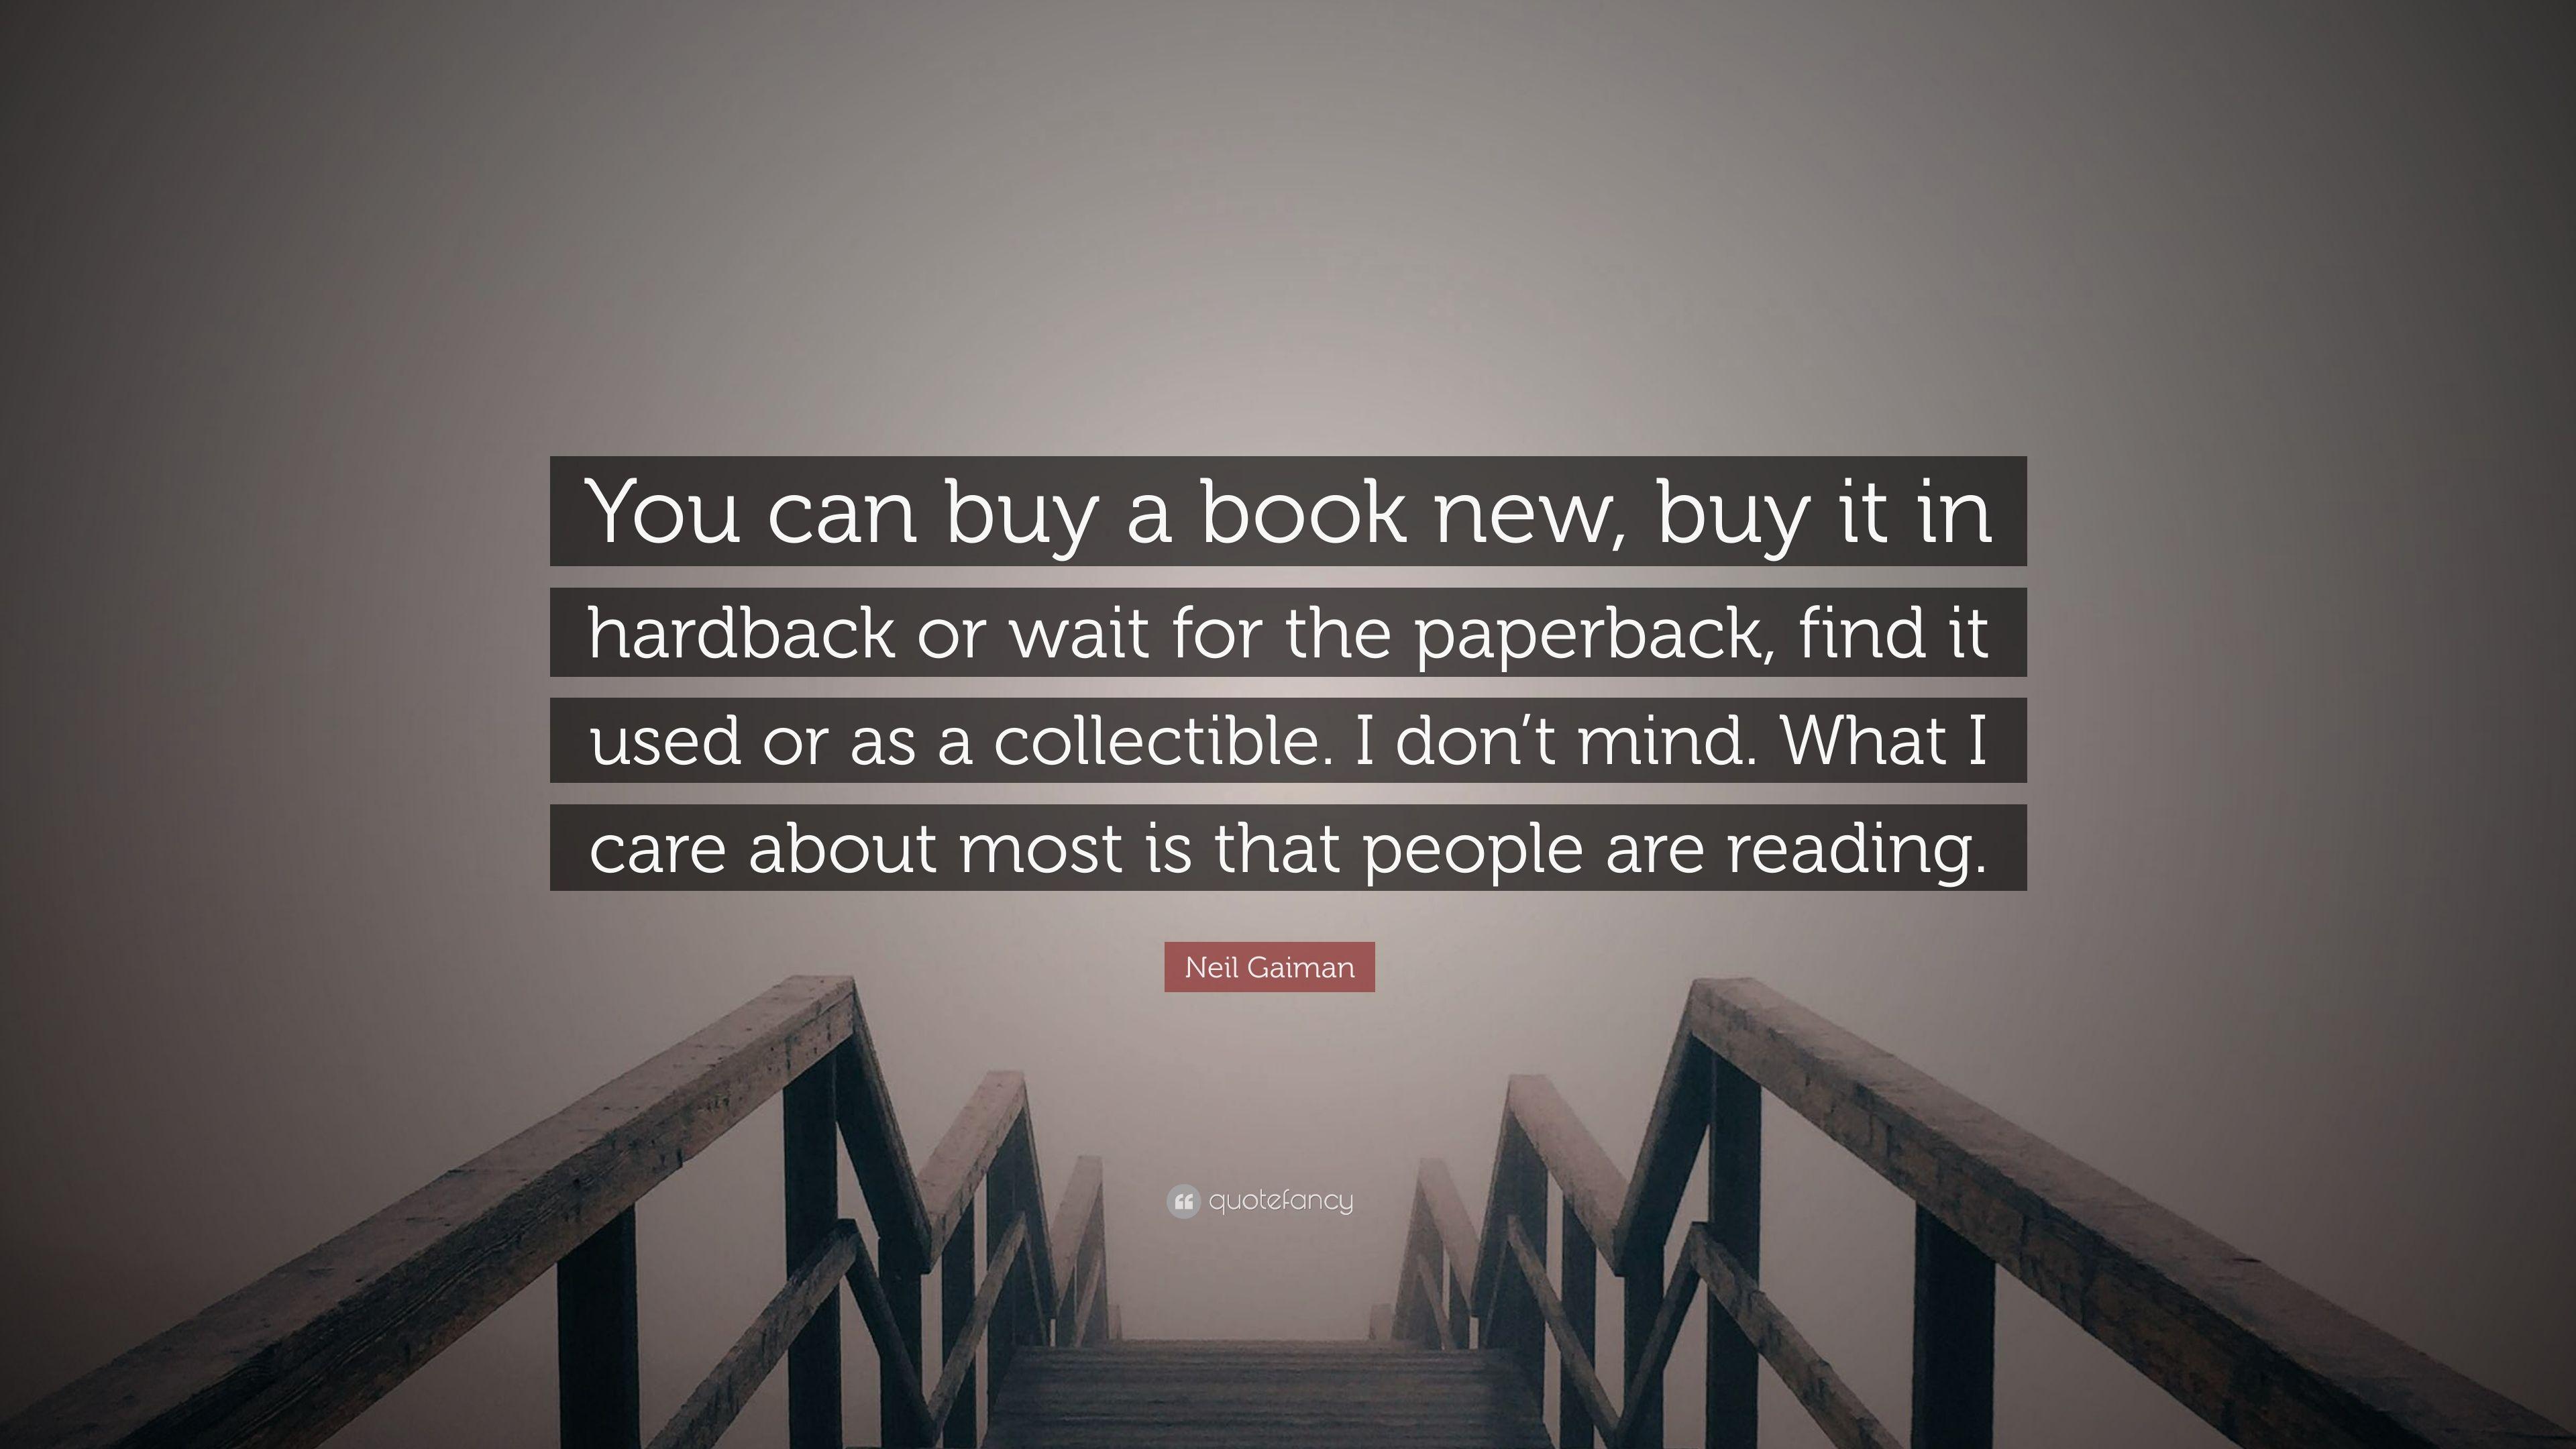 Neil Gaiman Quote: “You can buy a book new, buy it in hardback or